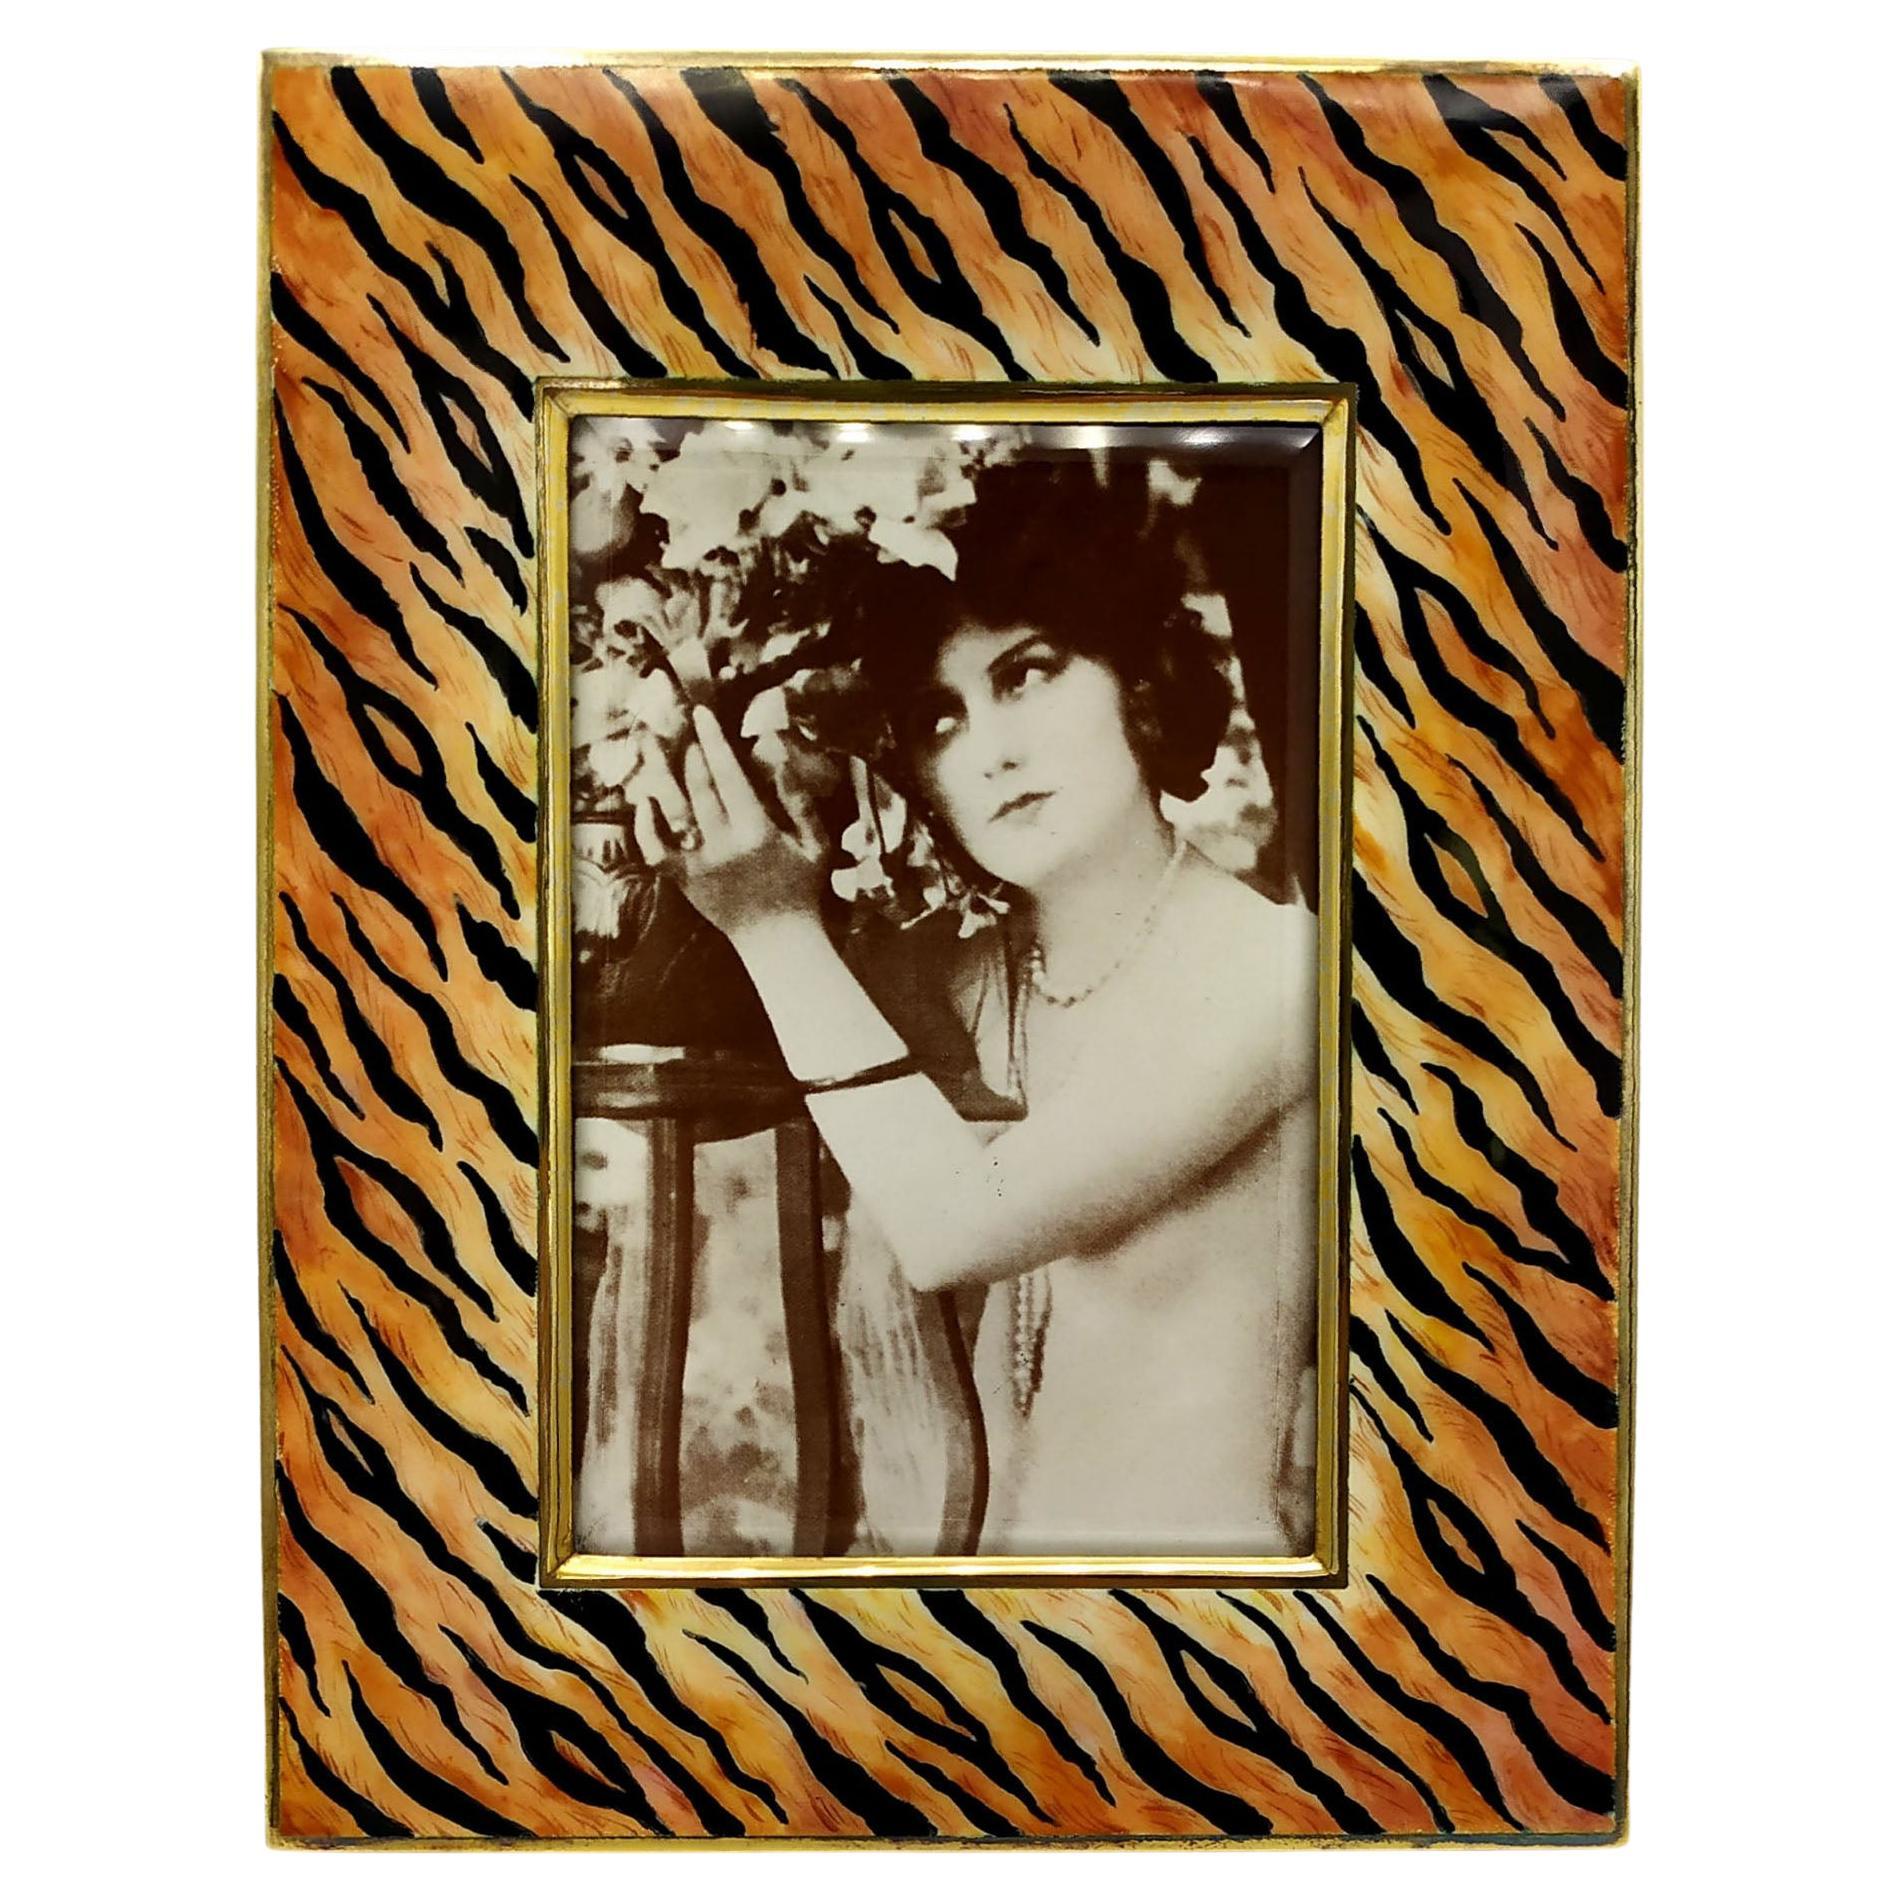 Rectangular frame in 925/1000 sterling silver gold plated with hand-painted fired enamel spotted tiger fur type in a modern contemporary style. External measurements cm. 14 x 17.5, internal cm. 7.5 x 11. Weight gr. 345. Designed by Franco Salimbeni